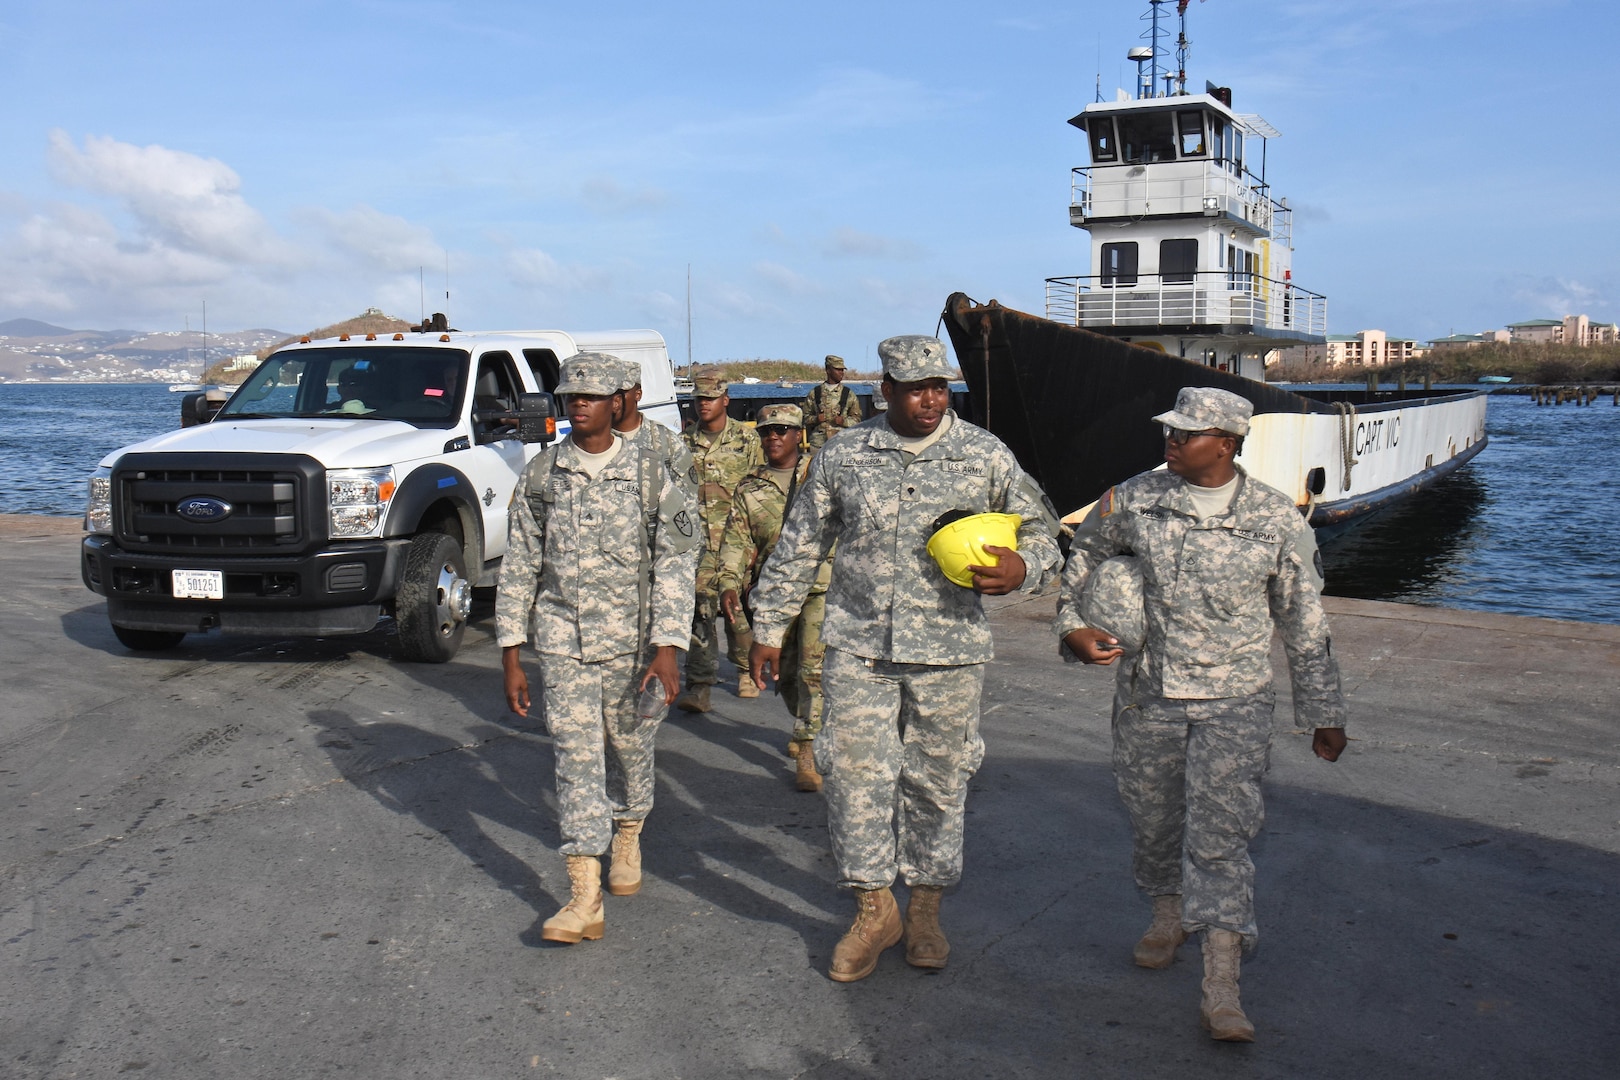 Virgin Islands Soldiers assisting after hurricanes